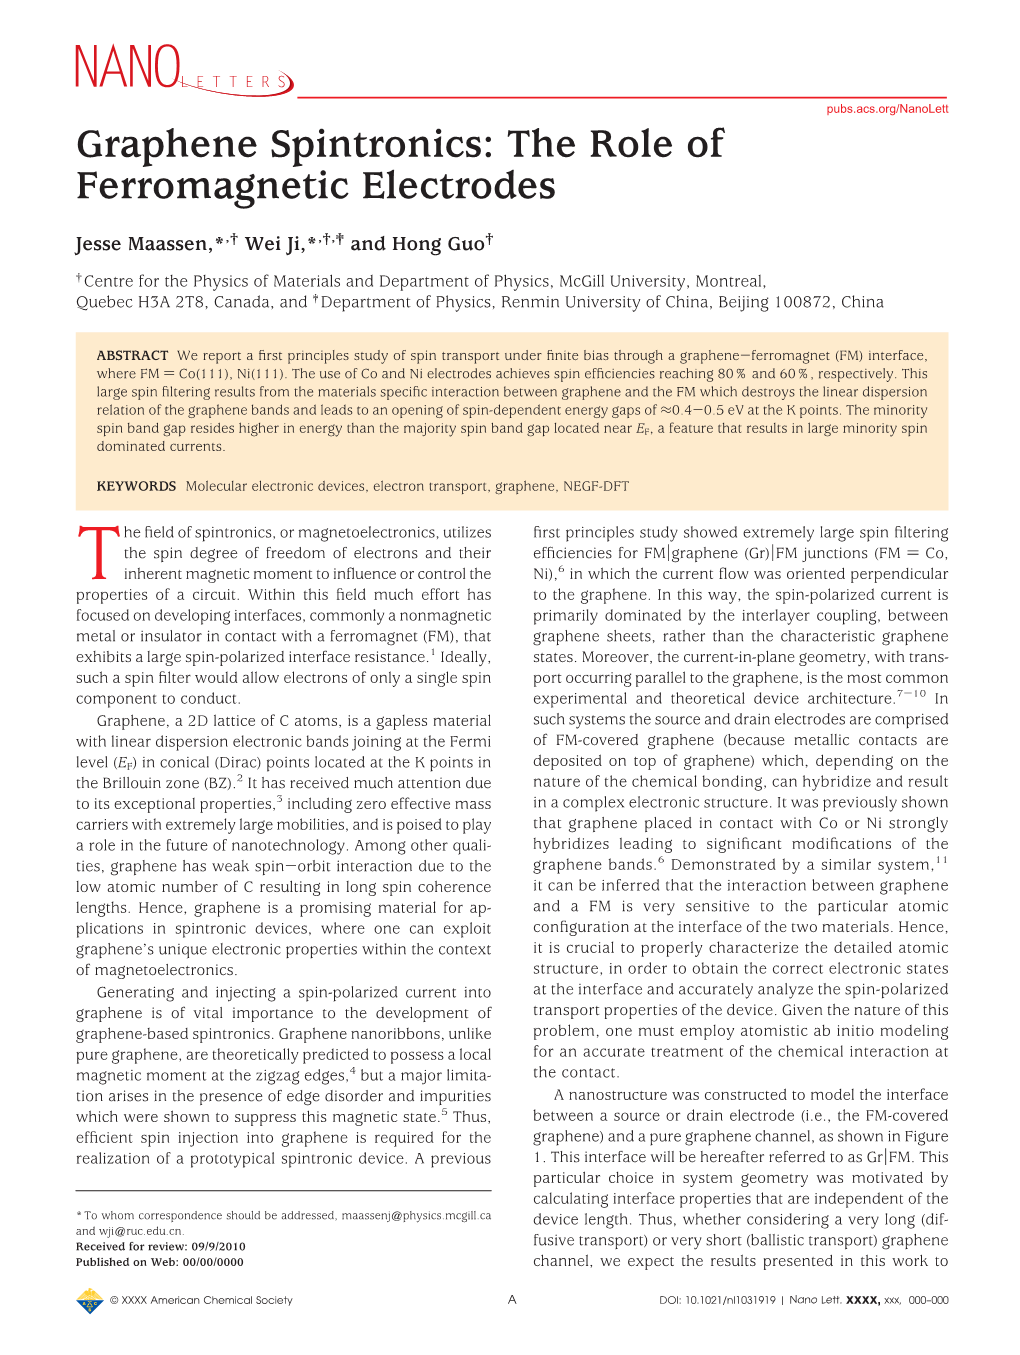 Graphene Spintronics: the Role of Ferromagnetic Electrodes